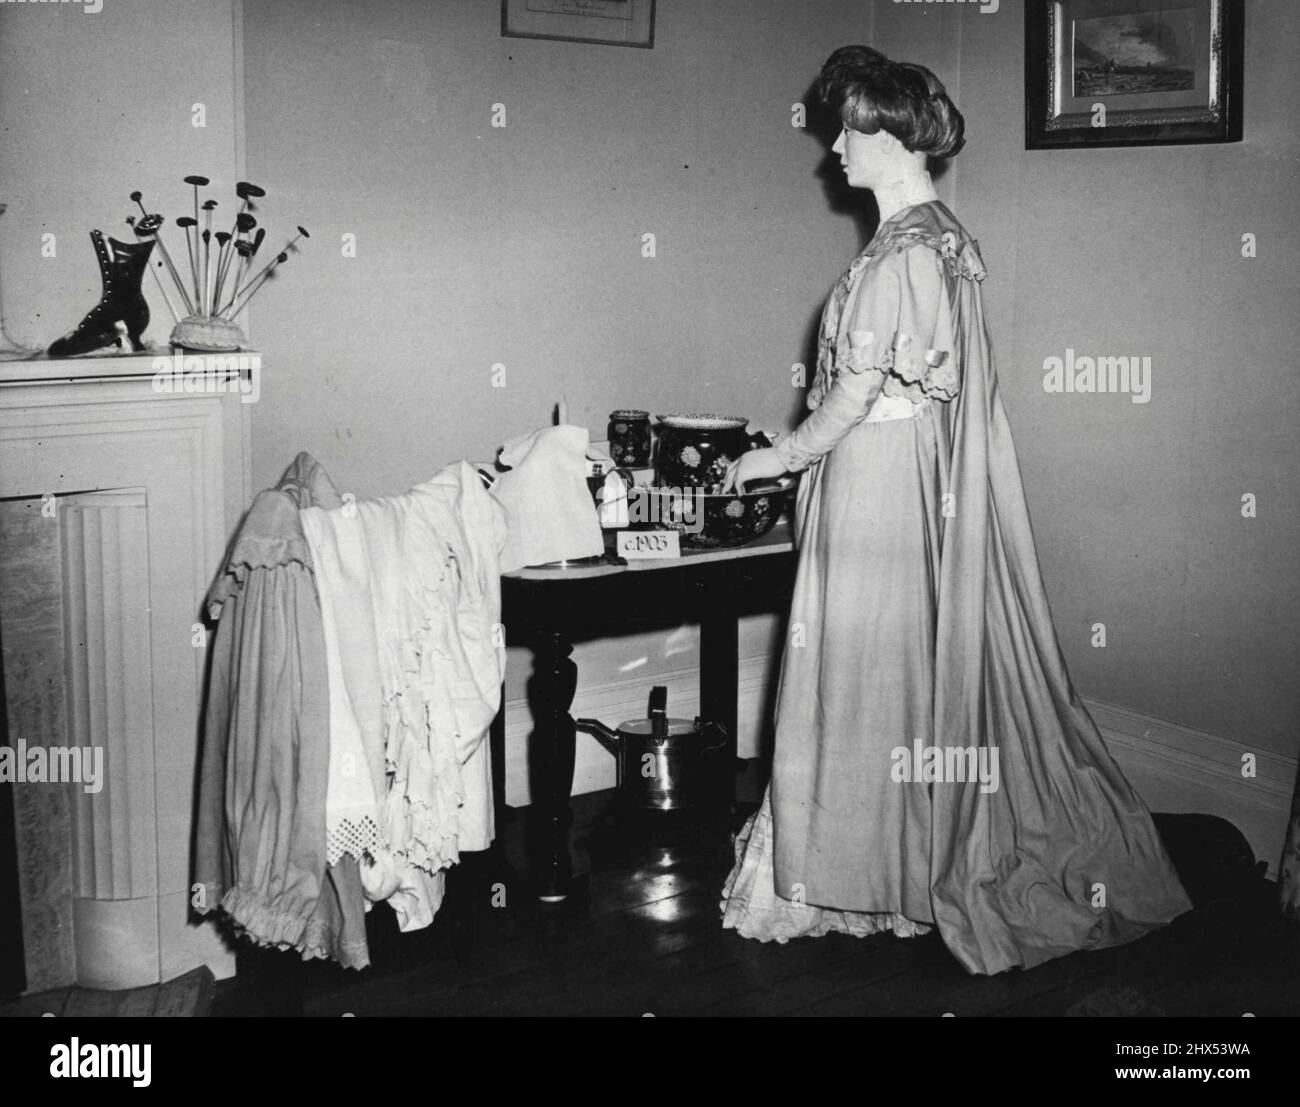 Dressing gown by washstand. The Museum of Costume at Eridge Castle, Kent. June 01, 1955. (Photo by Fox Photos). Stock Photo